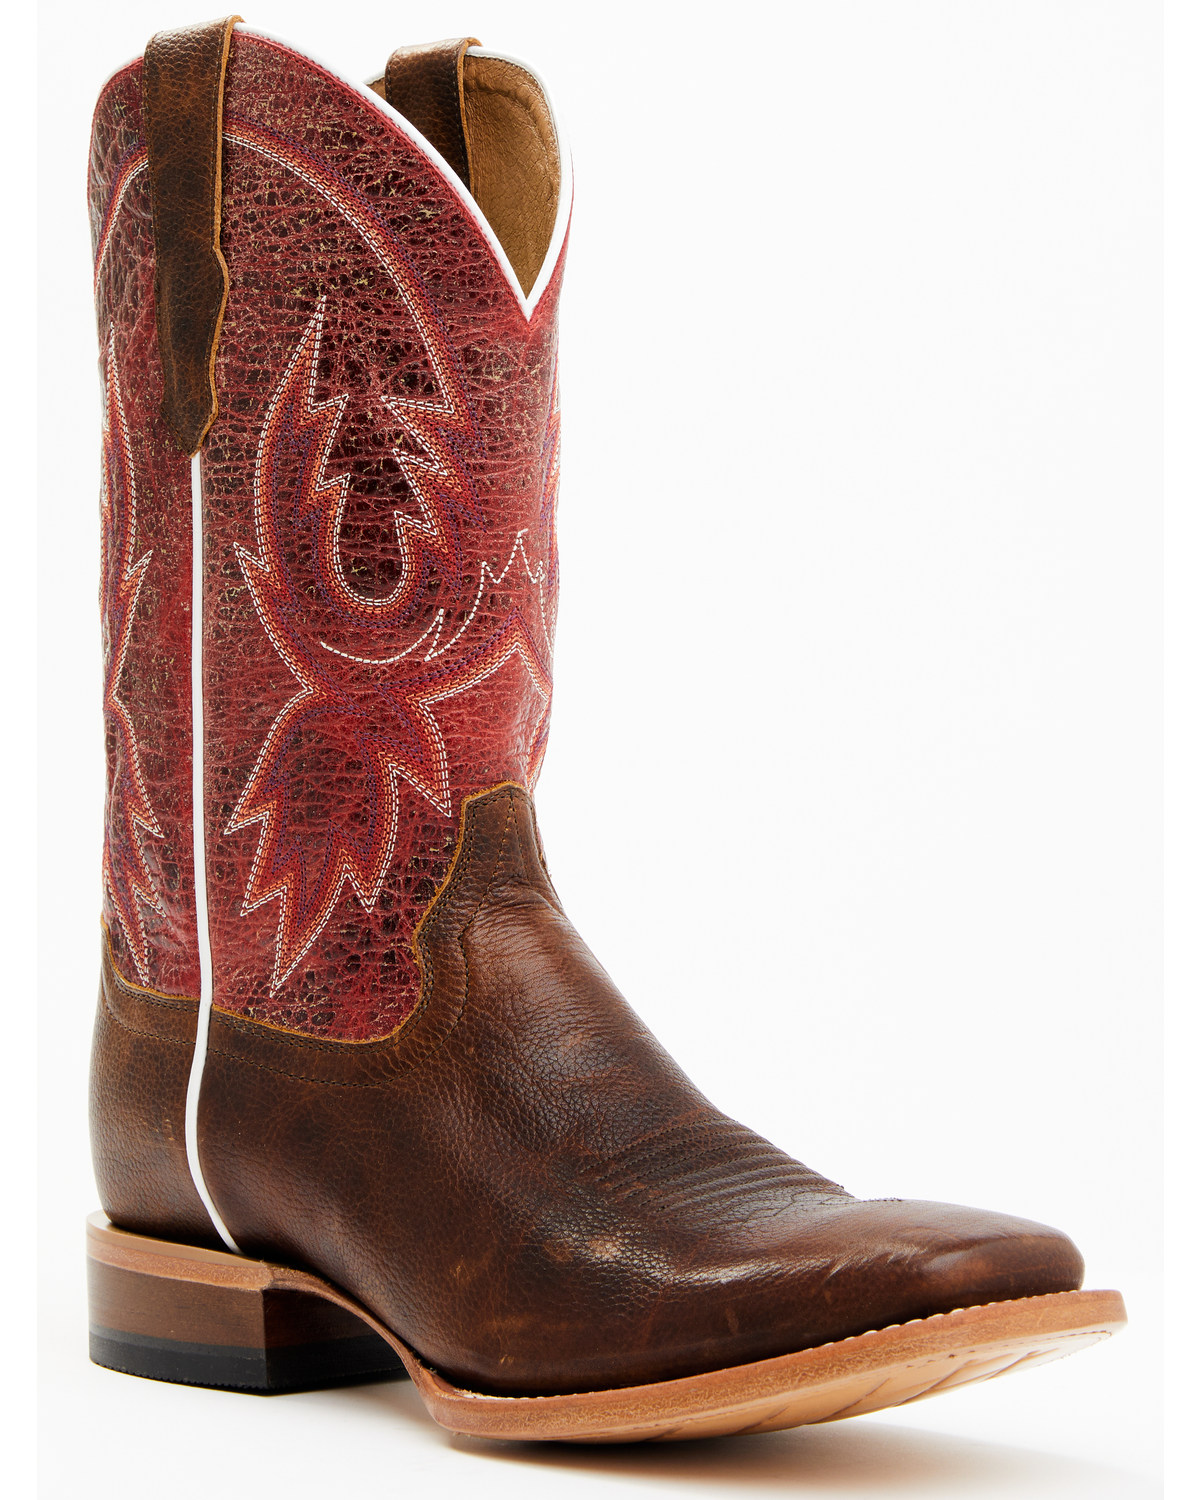 Cody James Men's Wade Western Boots - Broad Square Toe